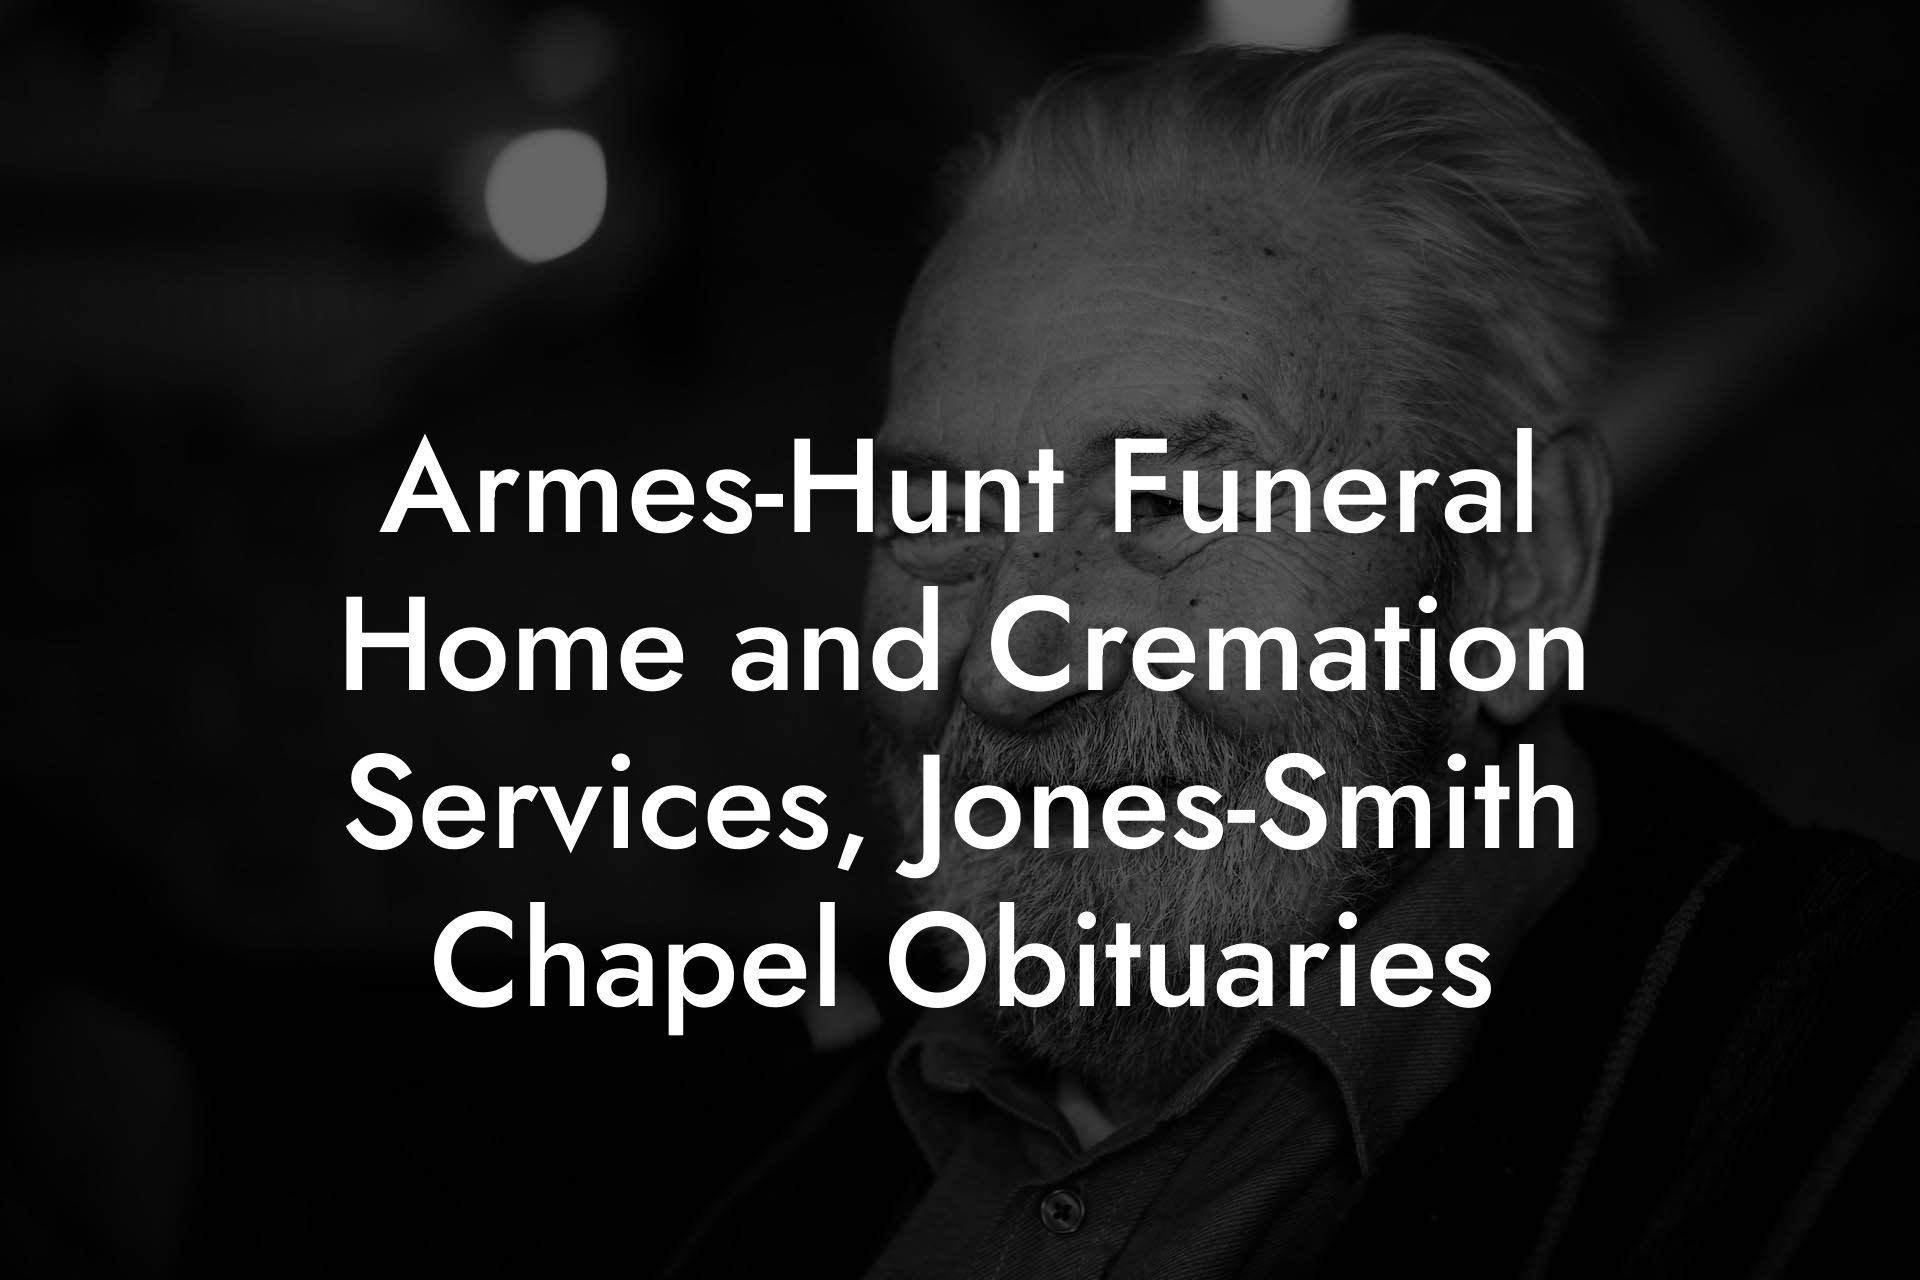 Armes-Hunt Funeral Home and Cremation Services, Jones-Smith Chapel Obituaries